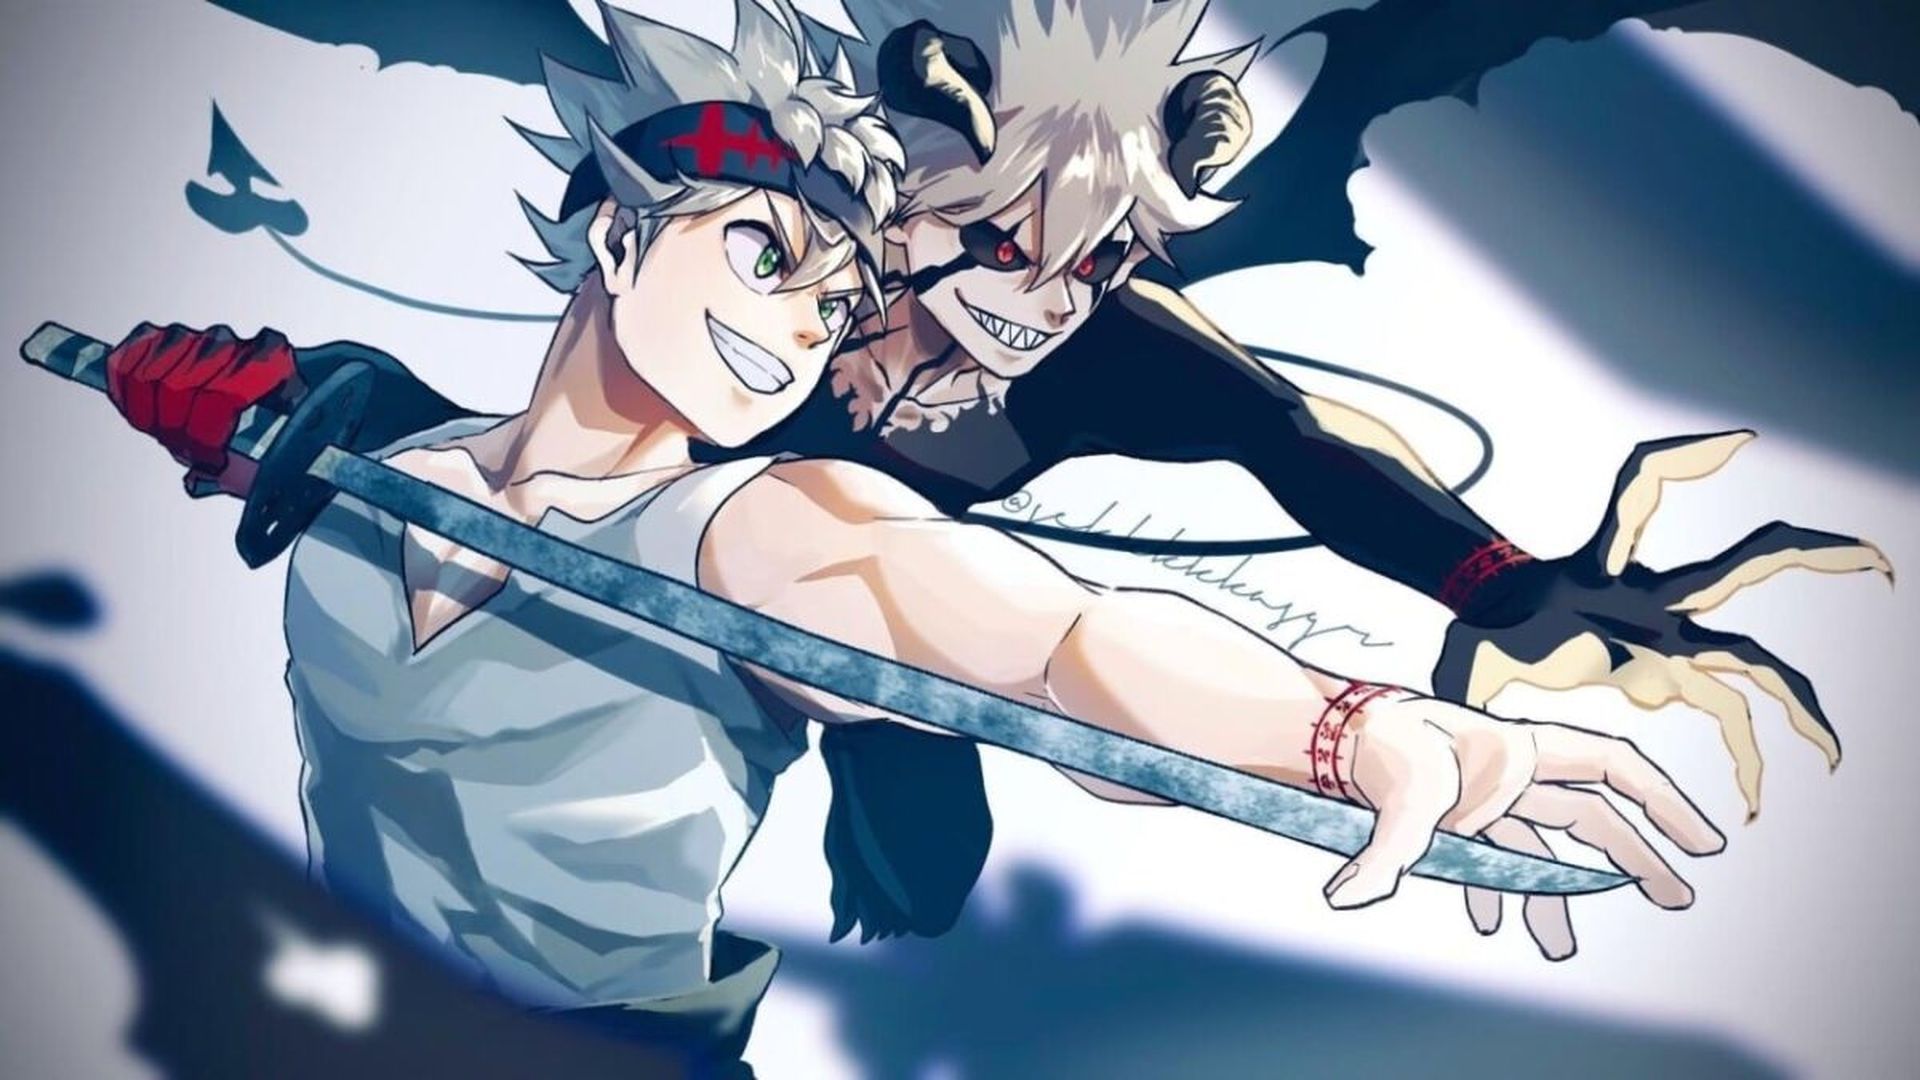 Black Clover season 5 release date, story, and more